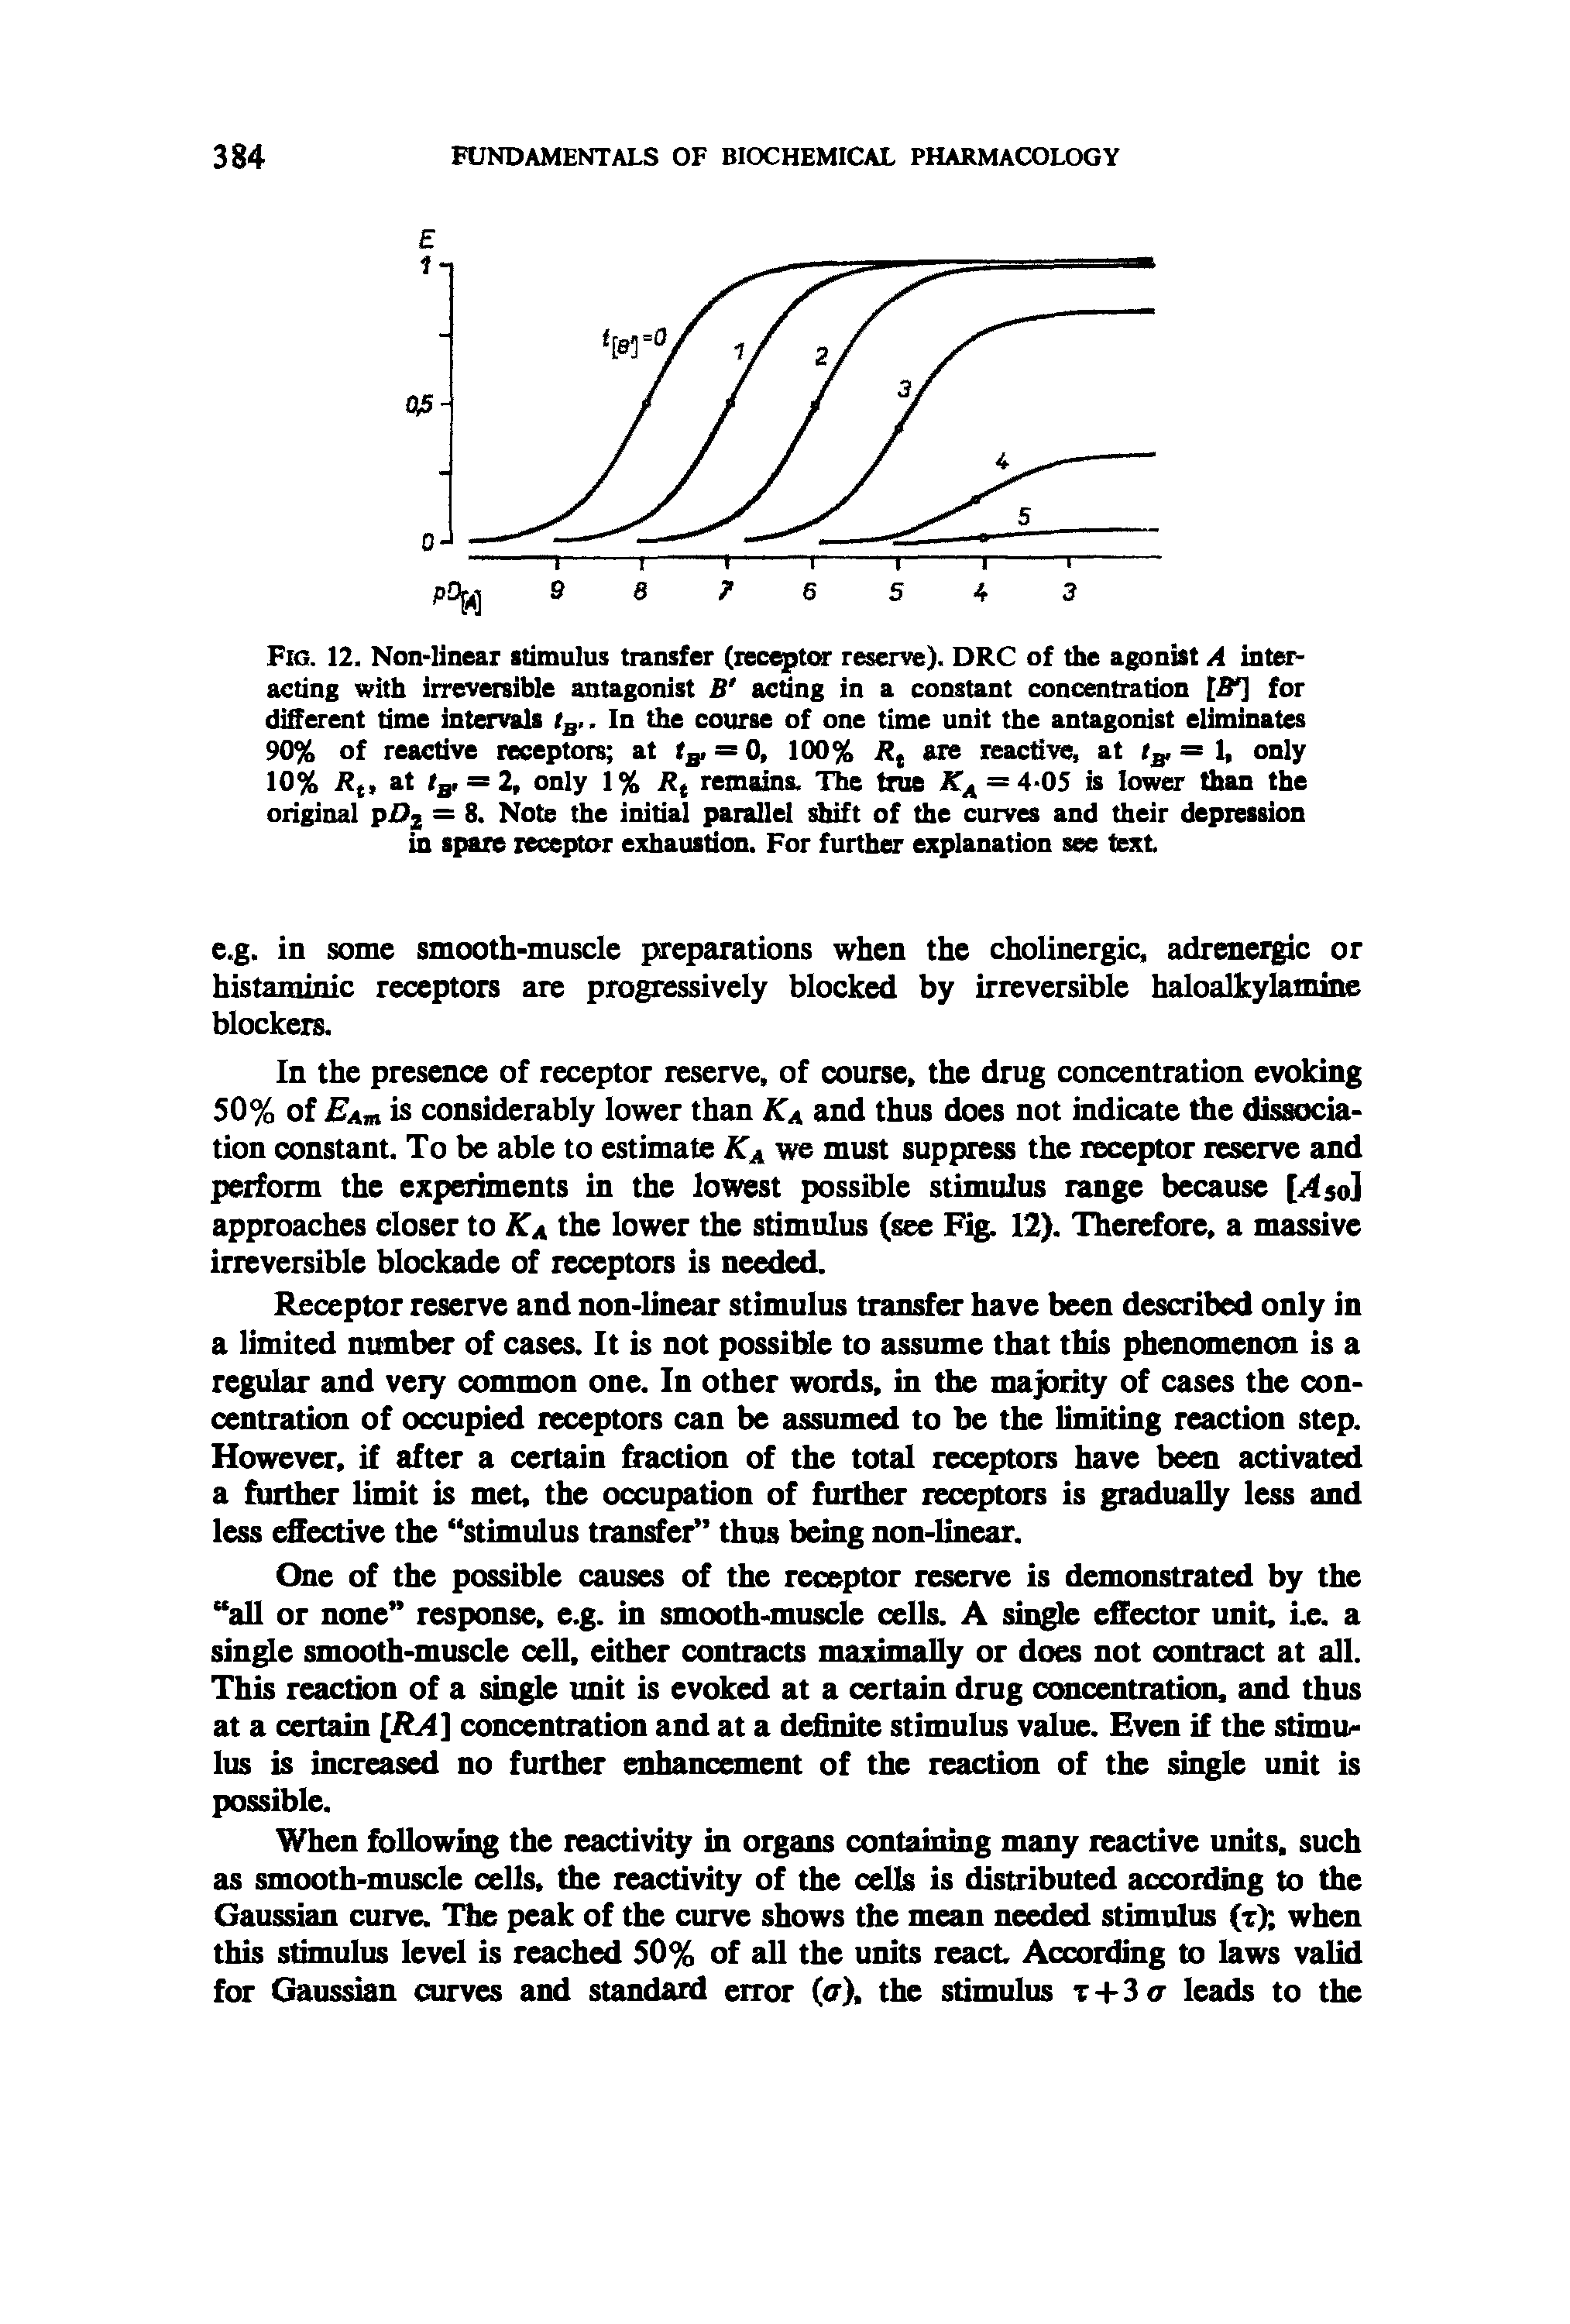 Fig. 12. Non-linear stimulus transfer (leceptm- reserve). DRC of the agonist A interacting with irreversible antagonist fi acting in a constant concentration for different time intervals tg,. In the course of one time unit the antagonist eliminates 90% of reactive receptors at tg, = 0, 100% are reactive, at = 1, only 10% Rf, at tg, = 2, only 1% remains. The true KJ = 4-05 is lower than the original pZJj — initial parallel shift of the curves and their depression...